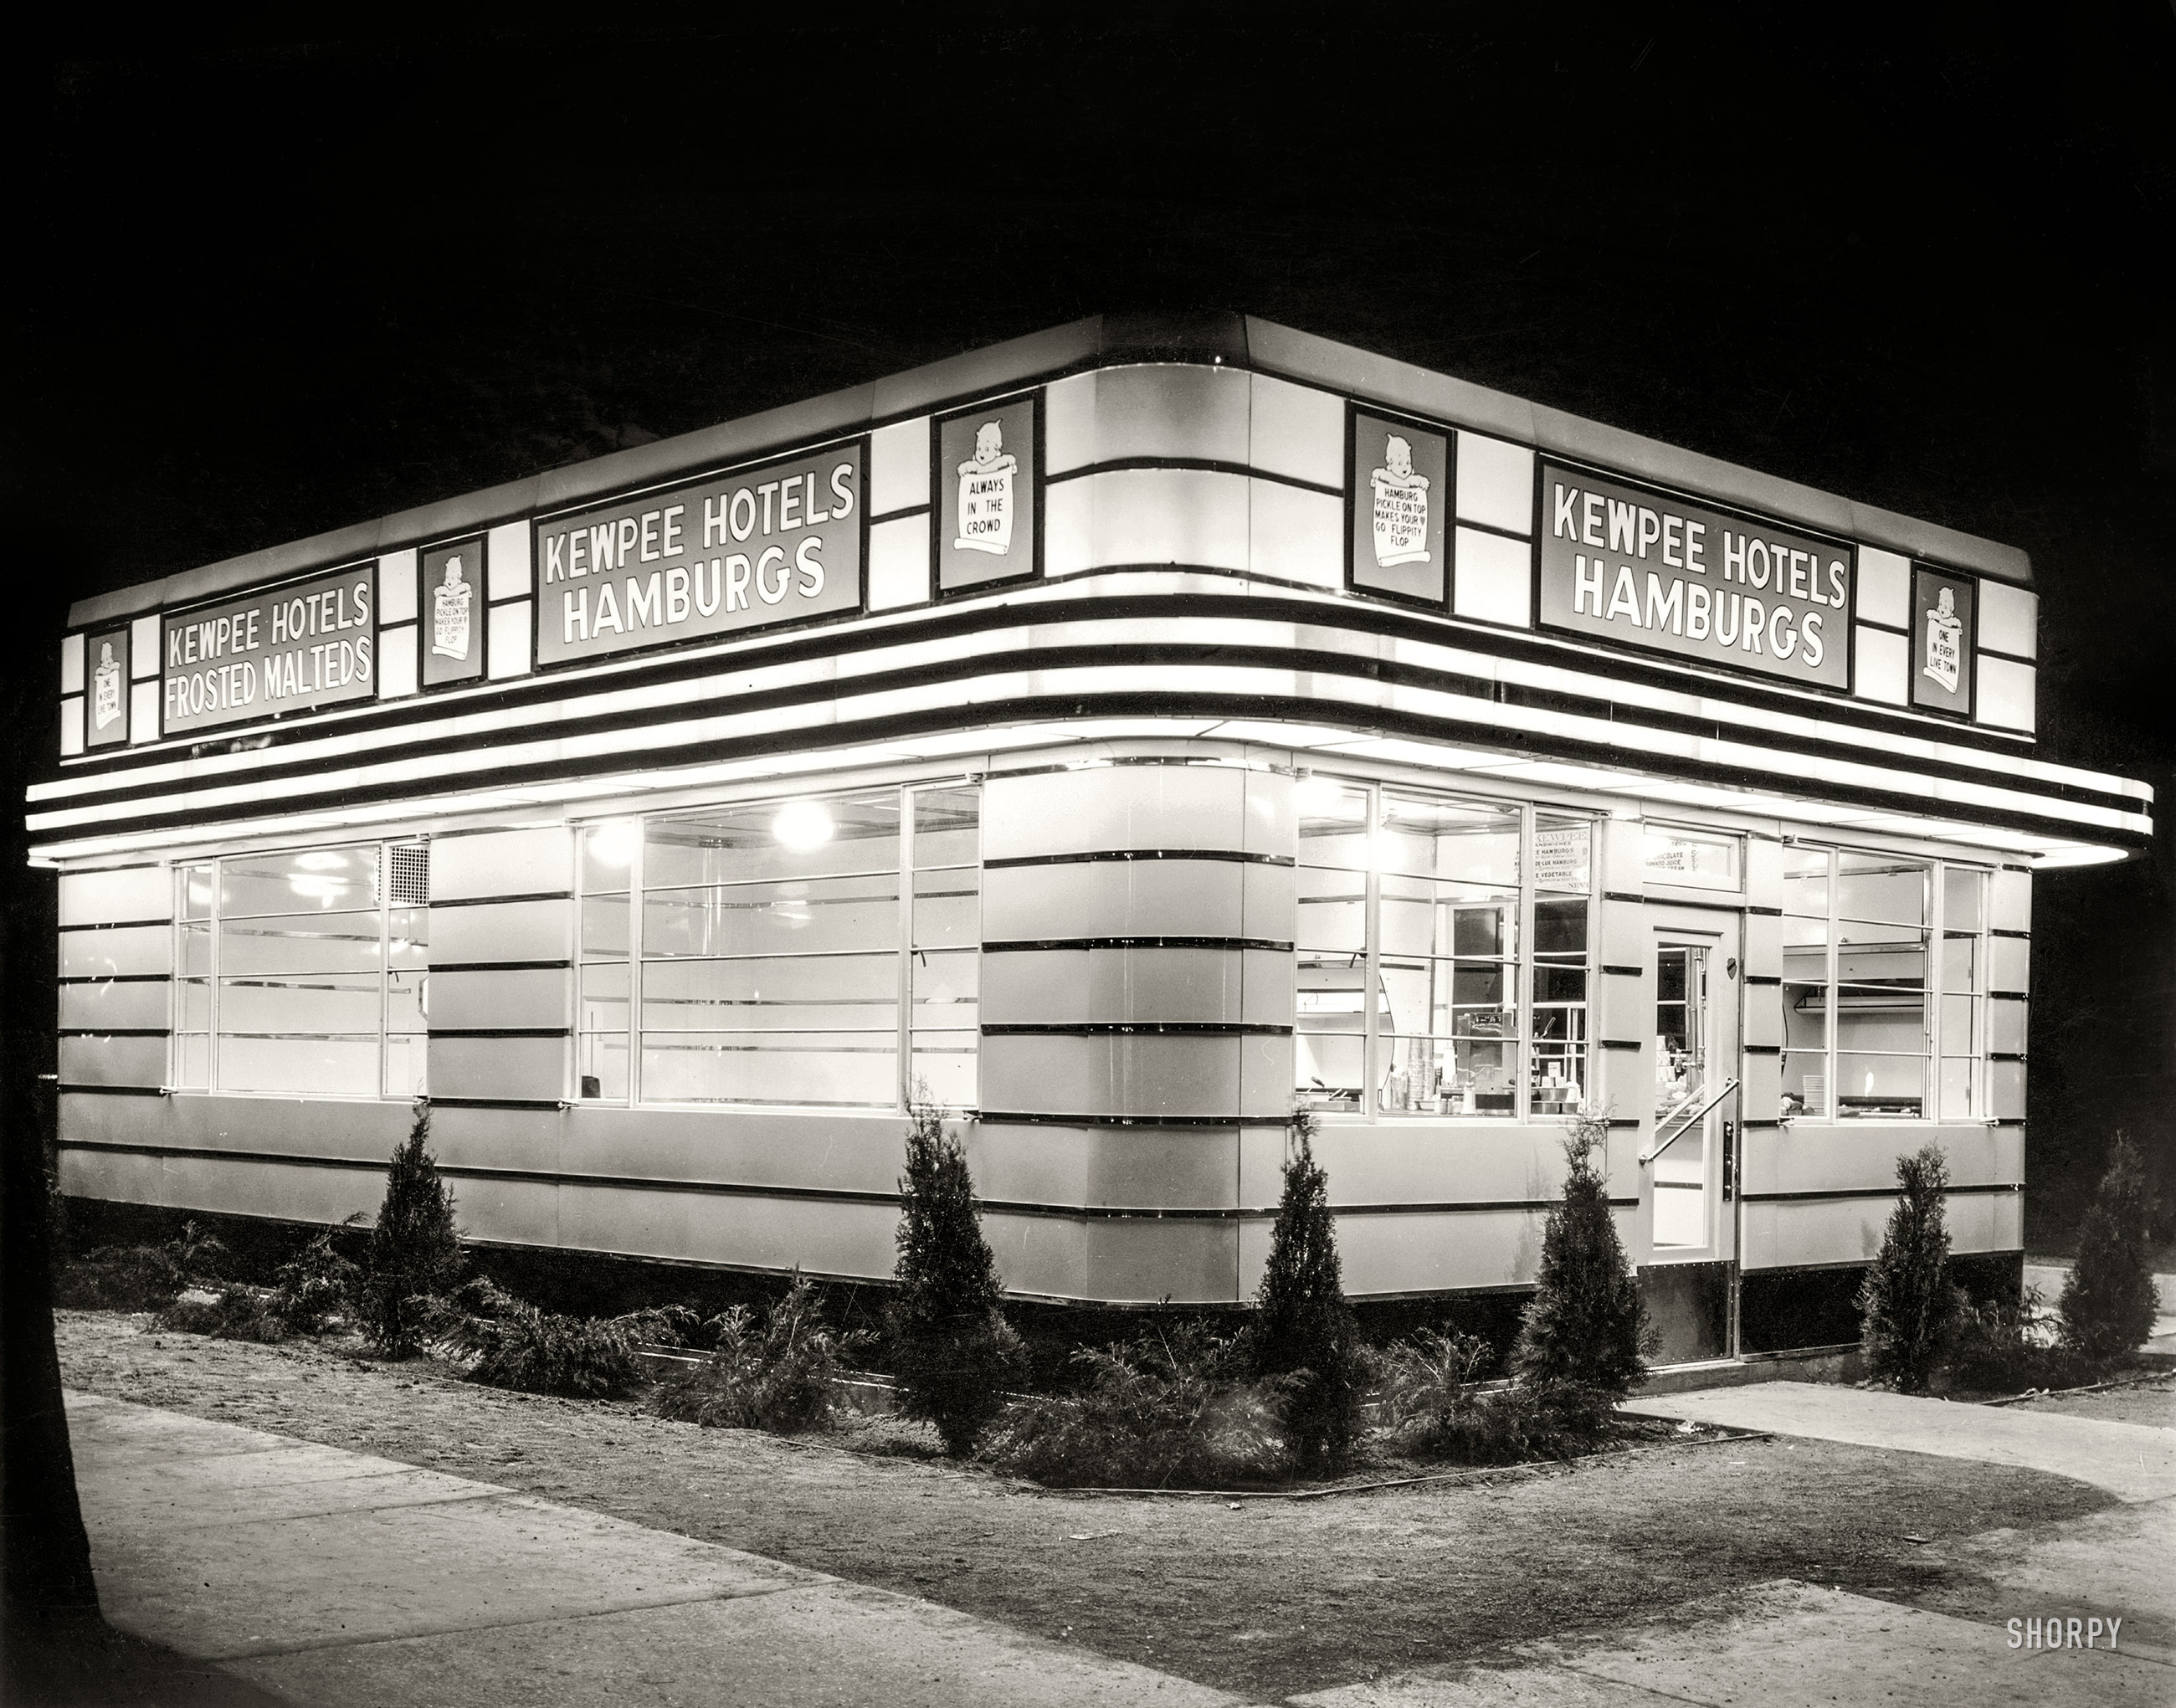 Circa 1930s. "Kewpee Hotels hamburger stand." This early fast-food chain ("Hamburg / Pickle on top / Makes your heart / Go flippity-flop") got its start in Michigan in the 1920s. Location and photographer unknown. View full size.